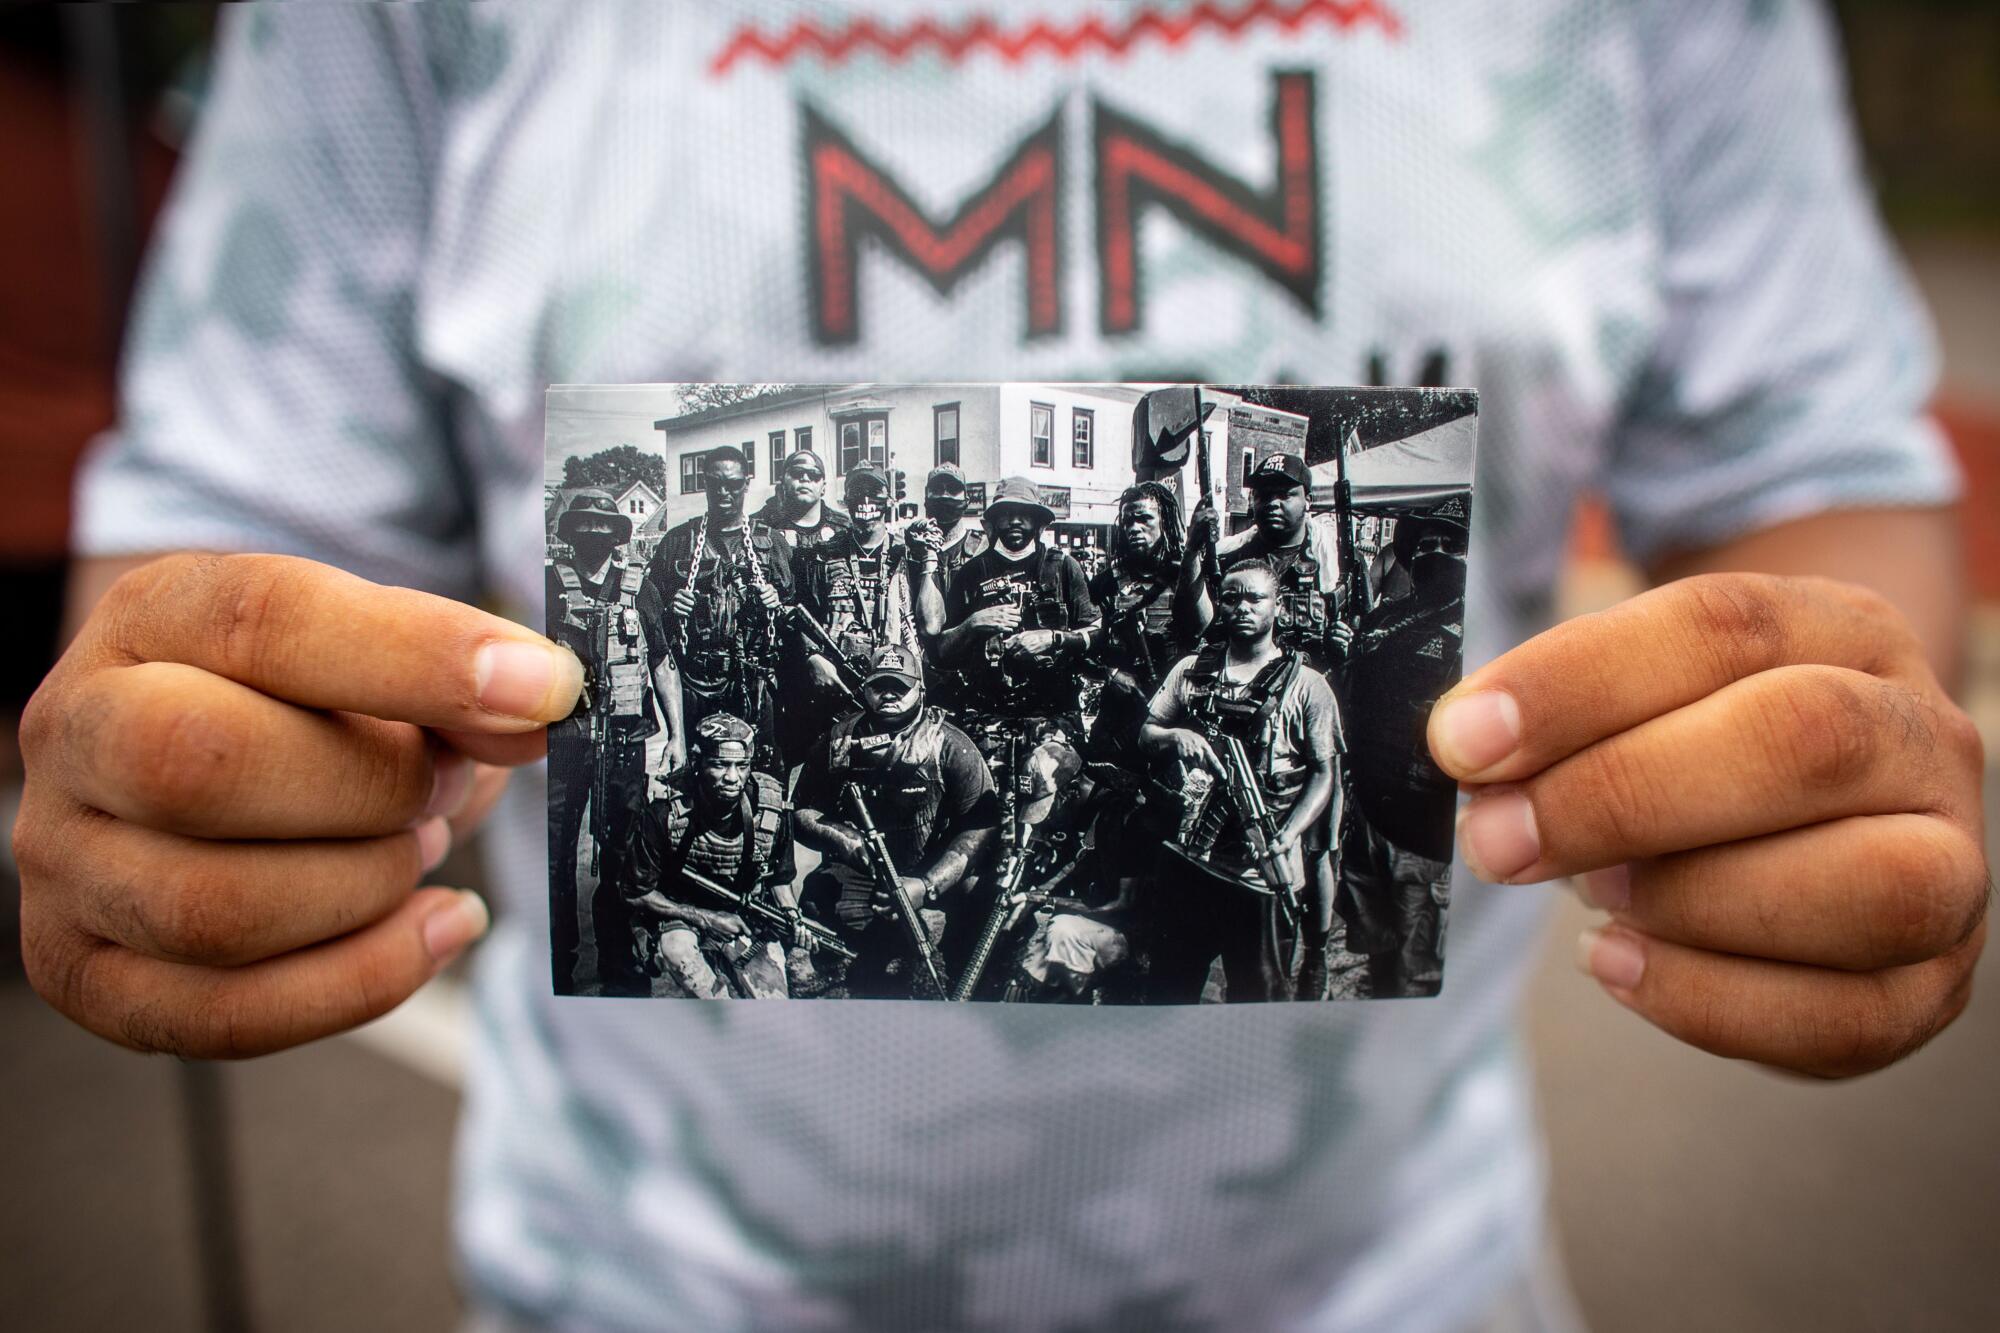 Romeal Taylor holds a photo of the Minnesota Freedom Fighters outside Cup Foods, where George Floyd died.